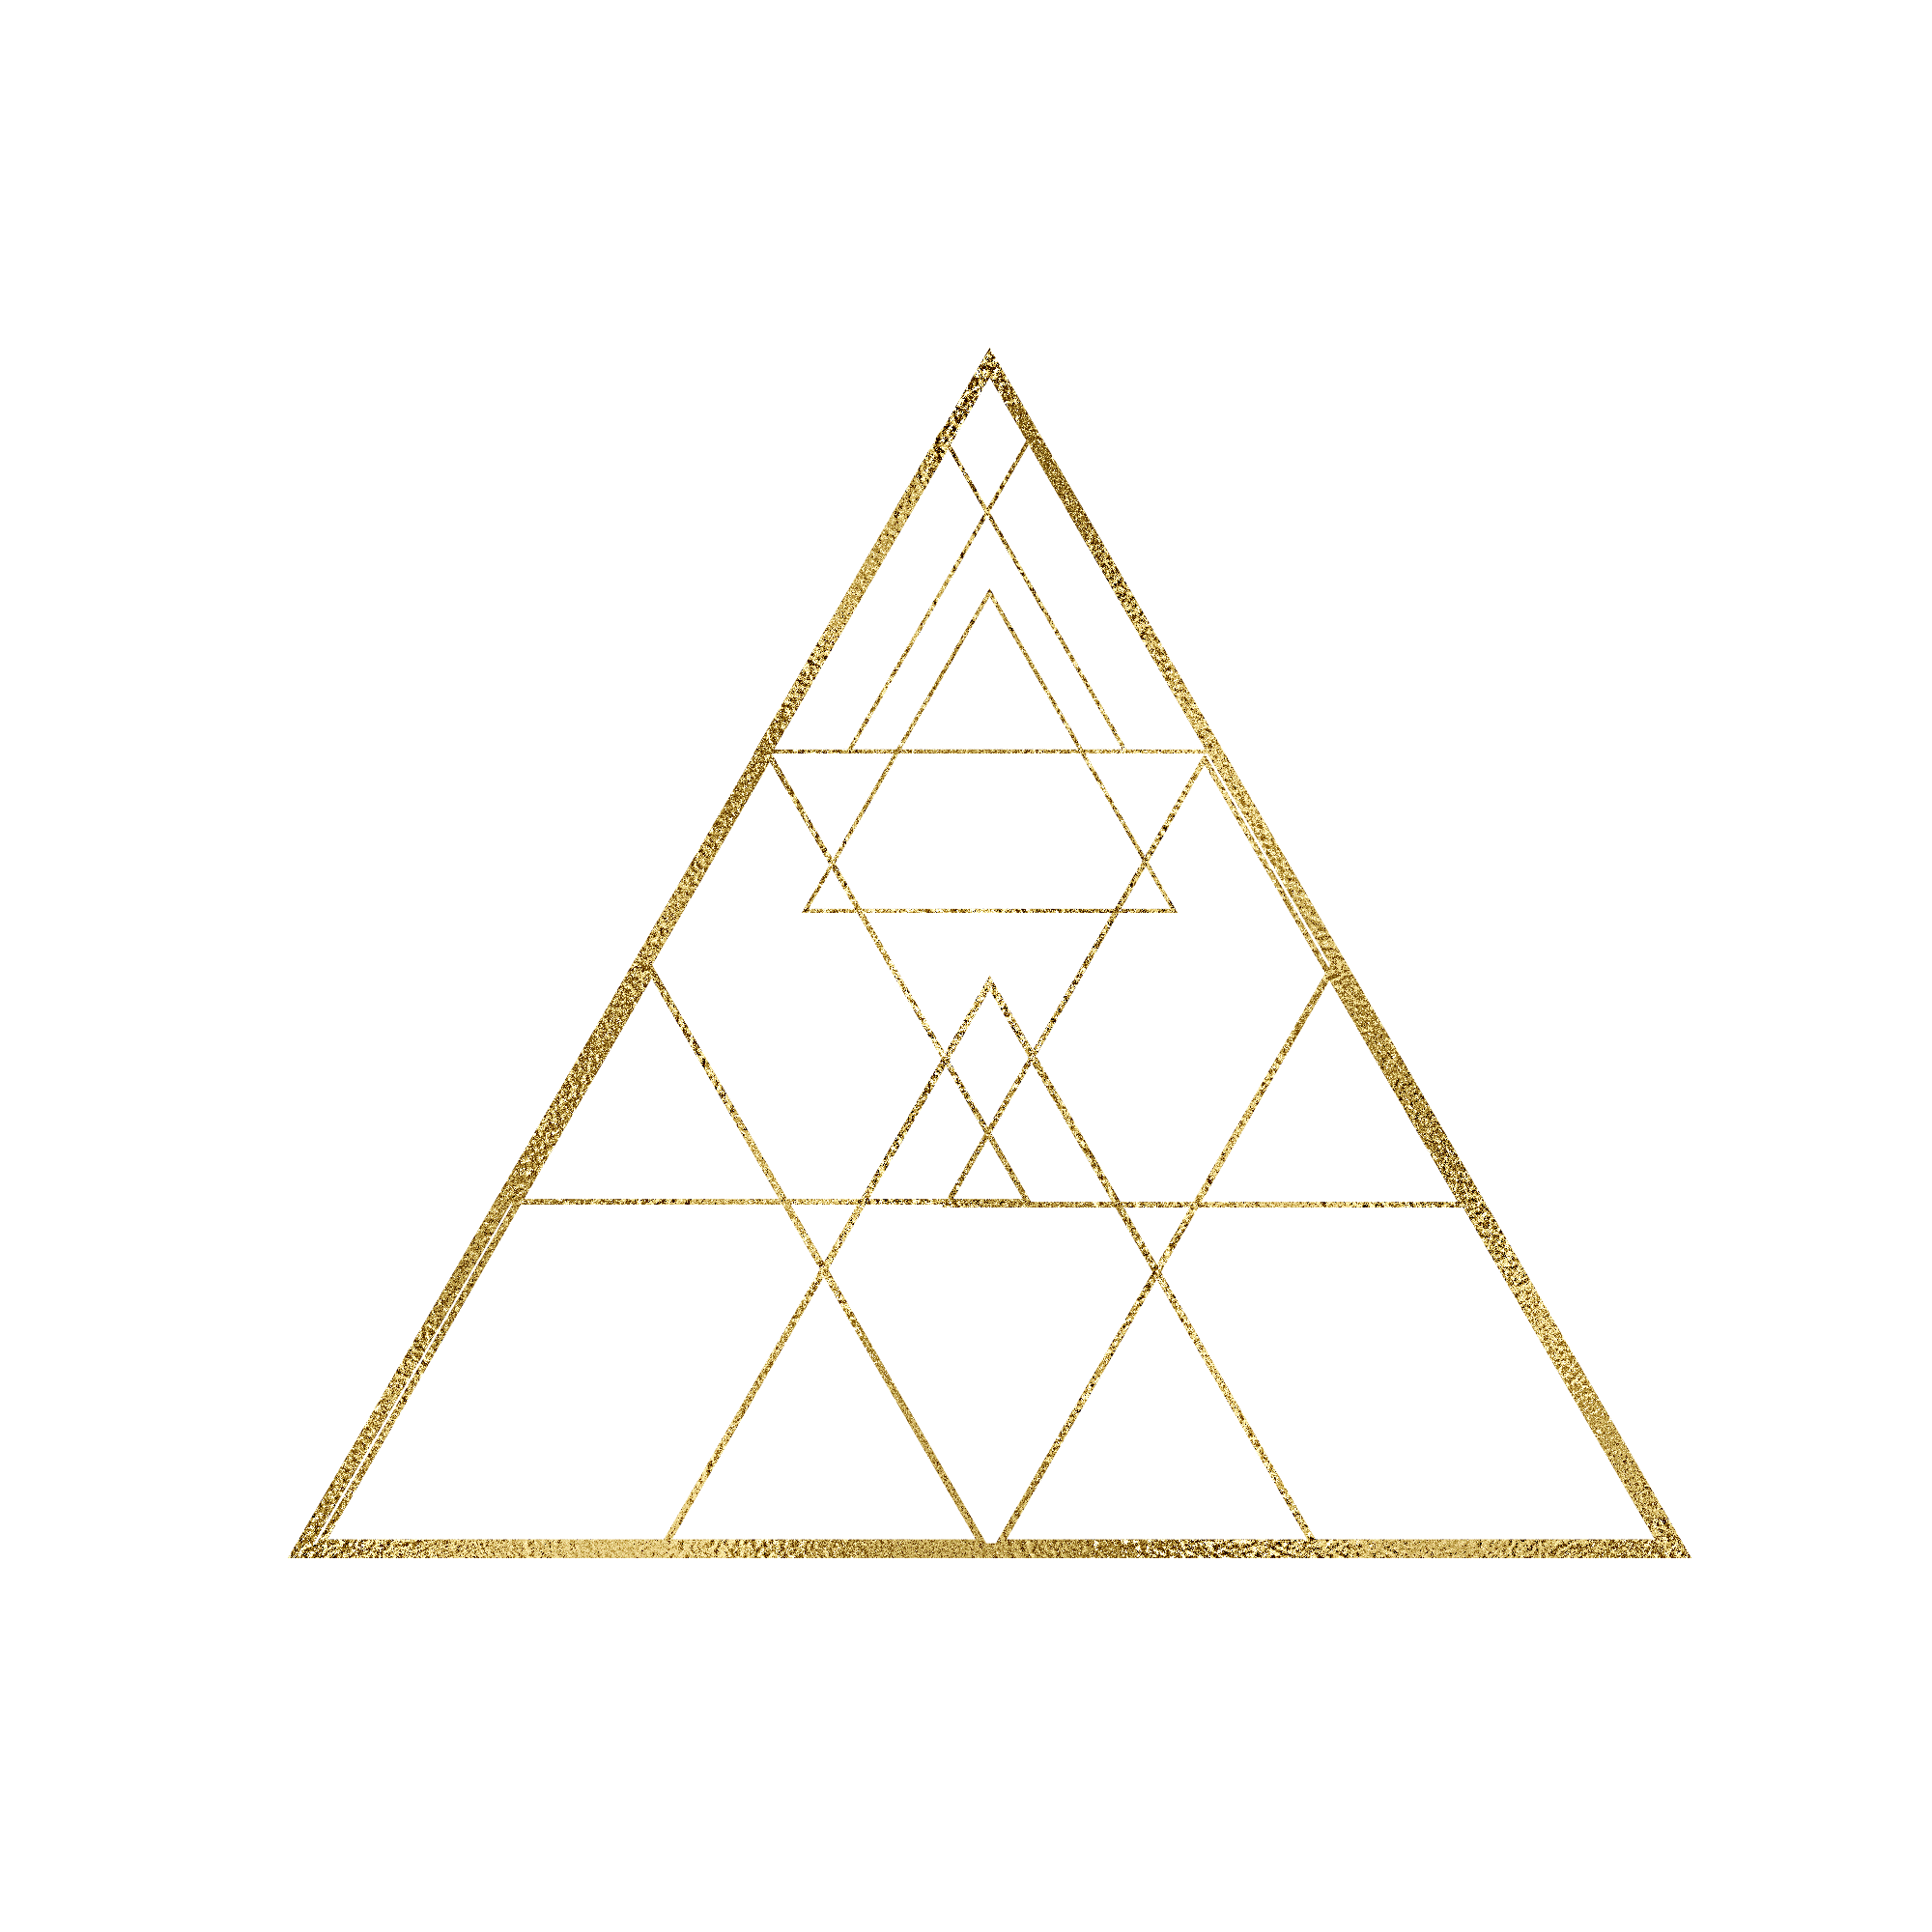 Geometry Golden Triangle Free PNG HQ Clipart